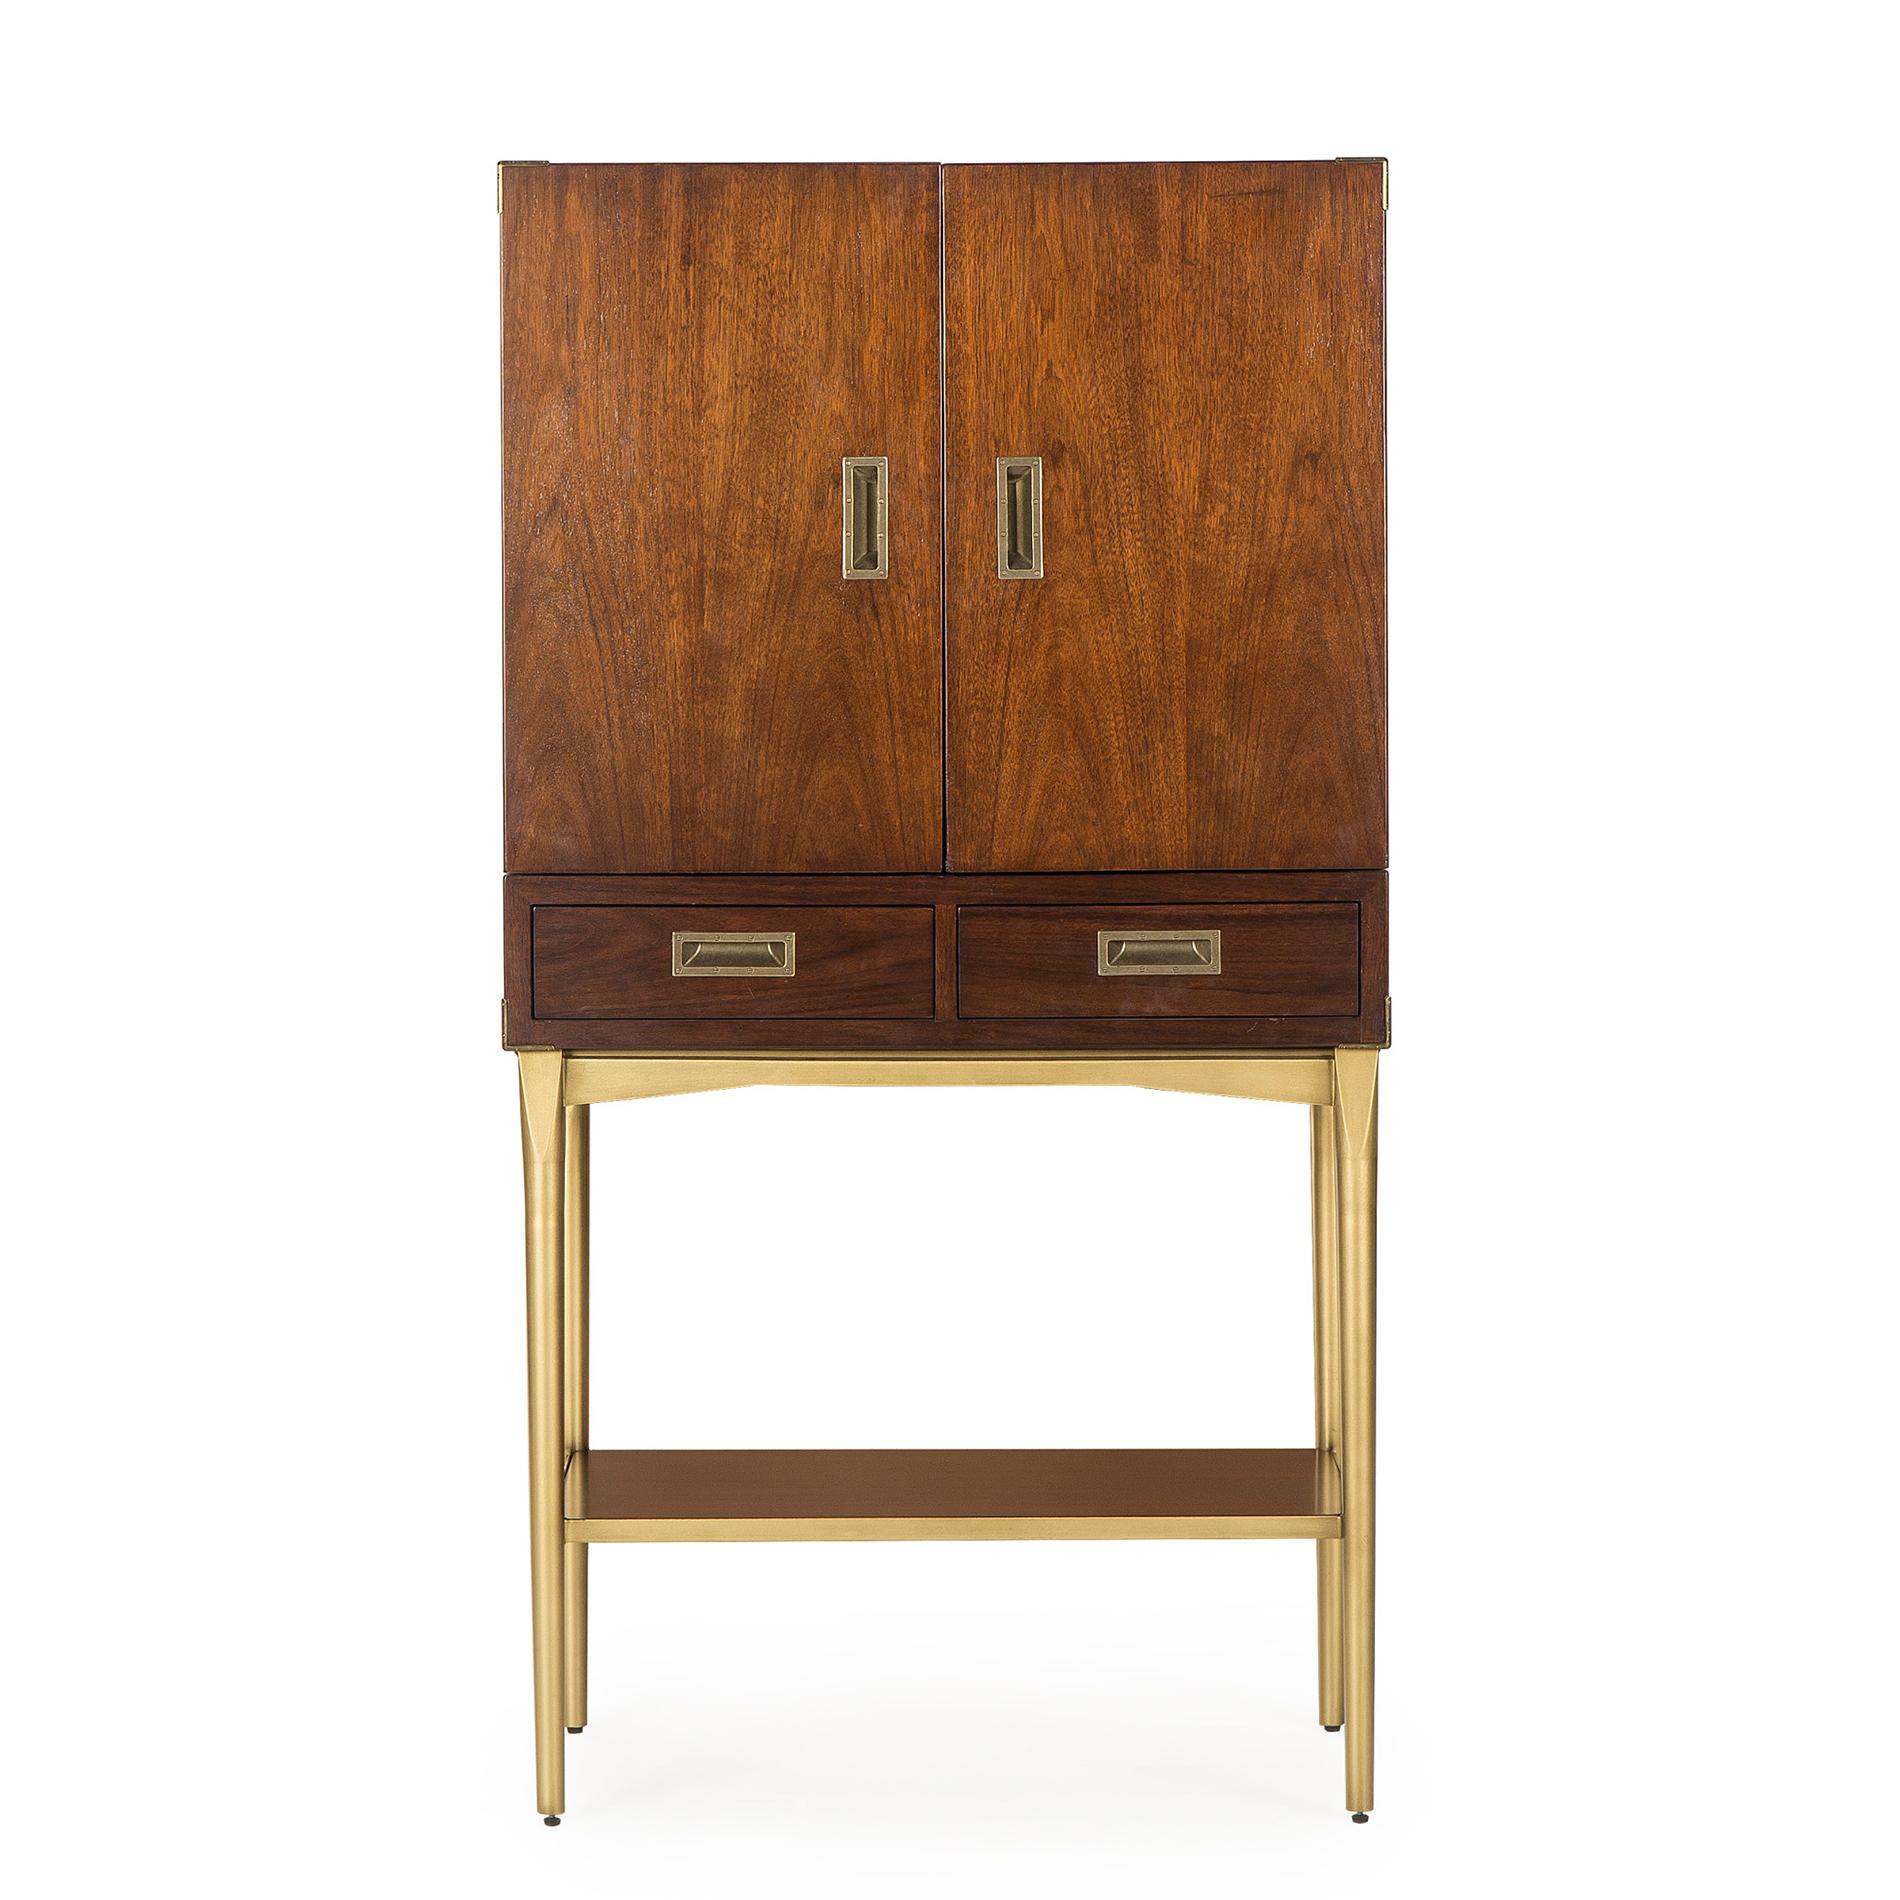 Bar cabinet desert with structure in solid acacia wood
in walnut finish. Base structure in steel in vintage brass
finish. Top include 2 doors and with glass mirror inside
doors and at the back of the inside. With 2 drawers.
With leather straps.